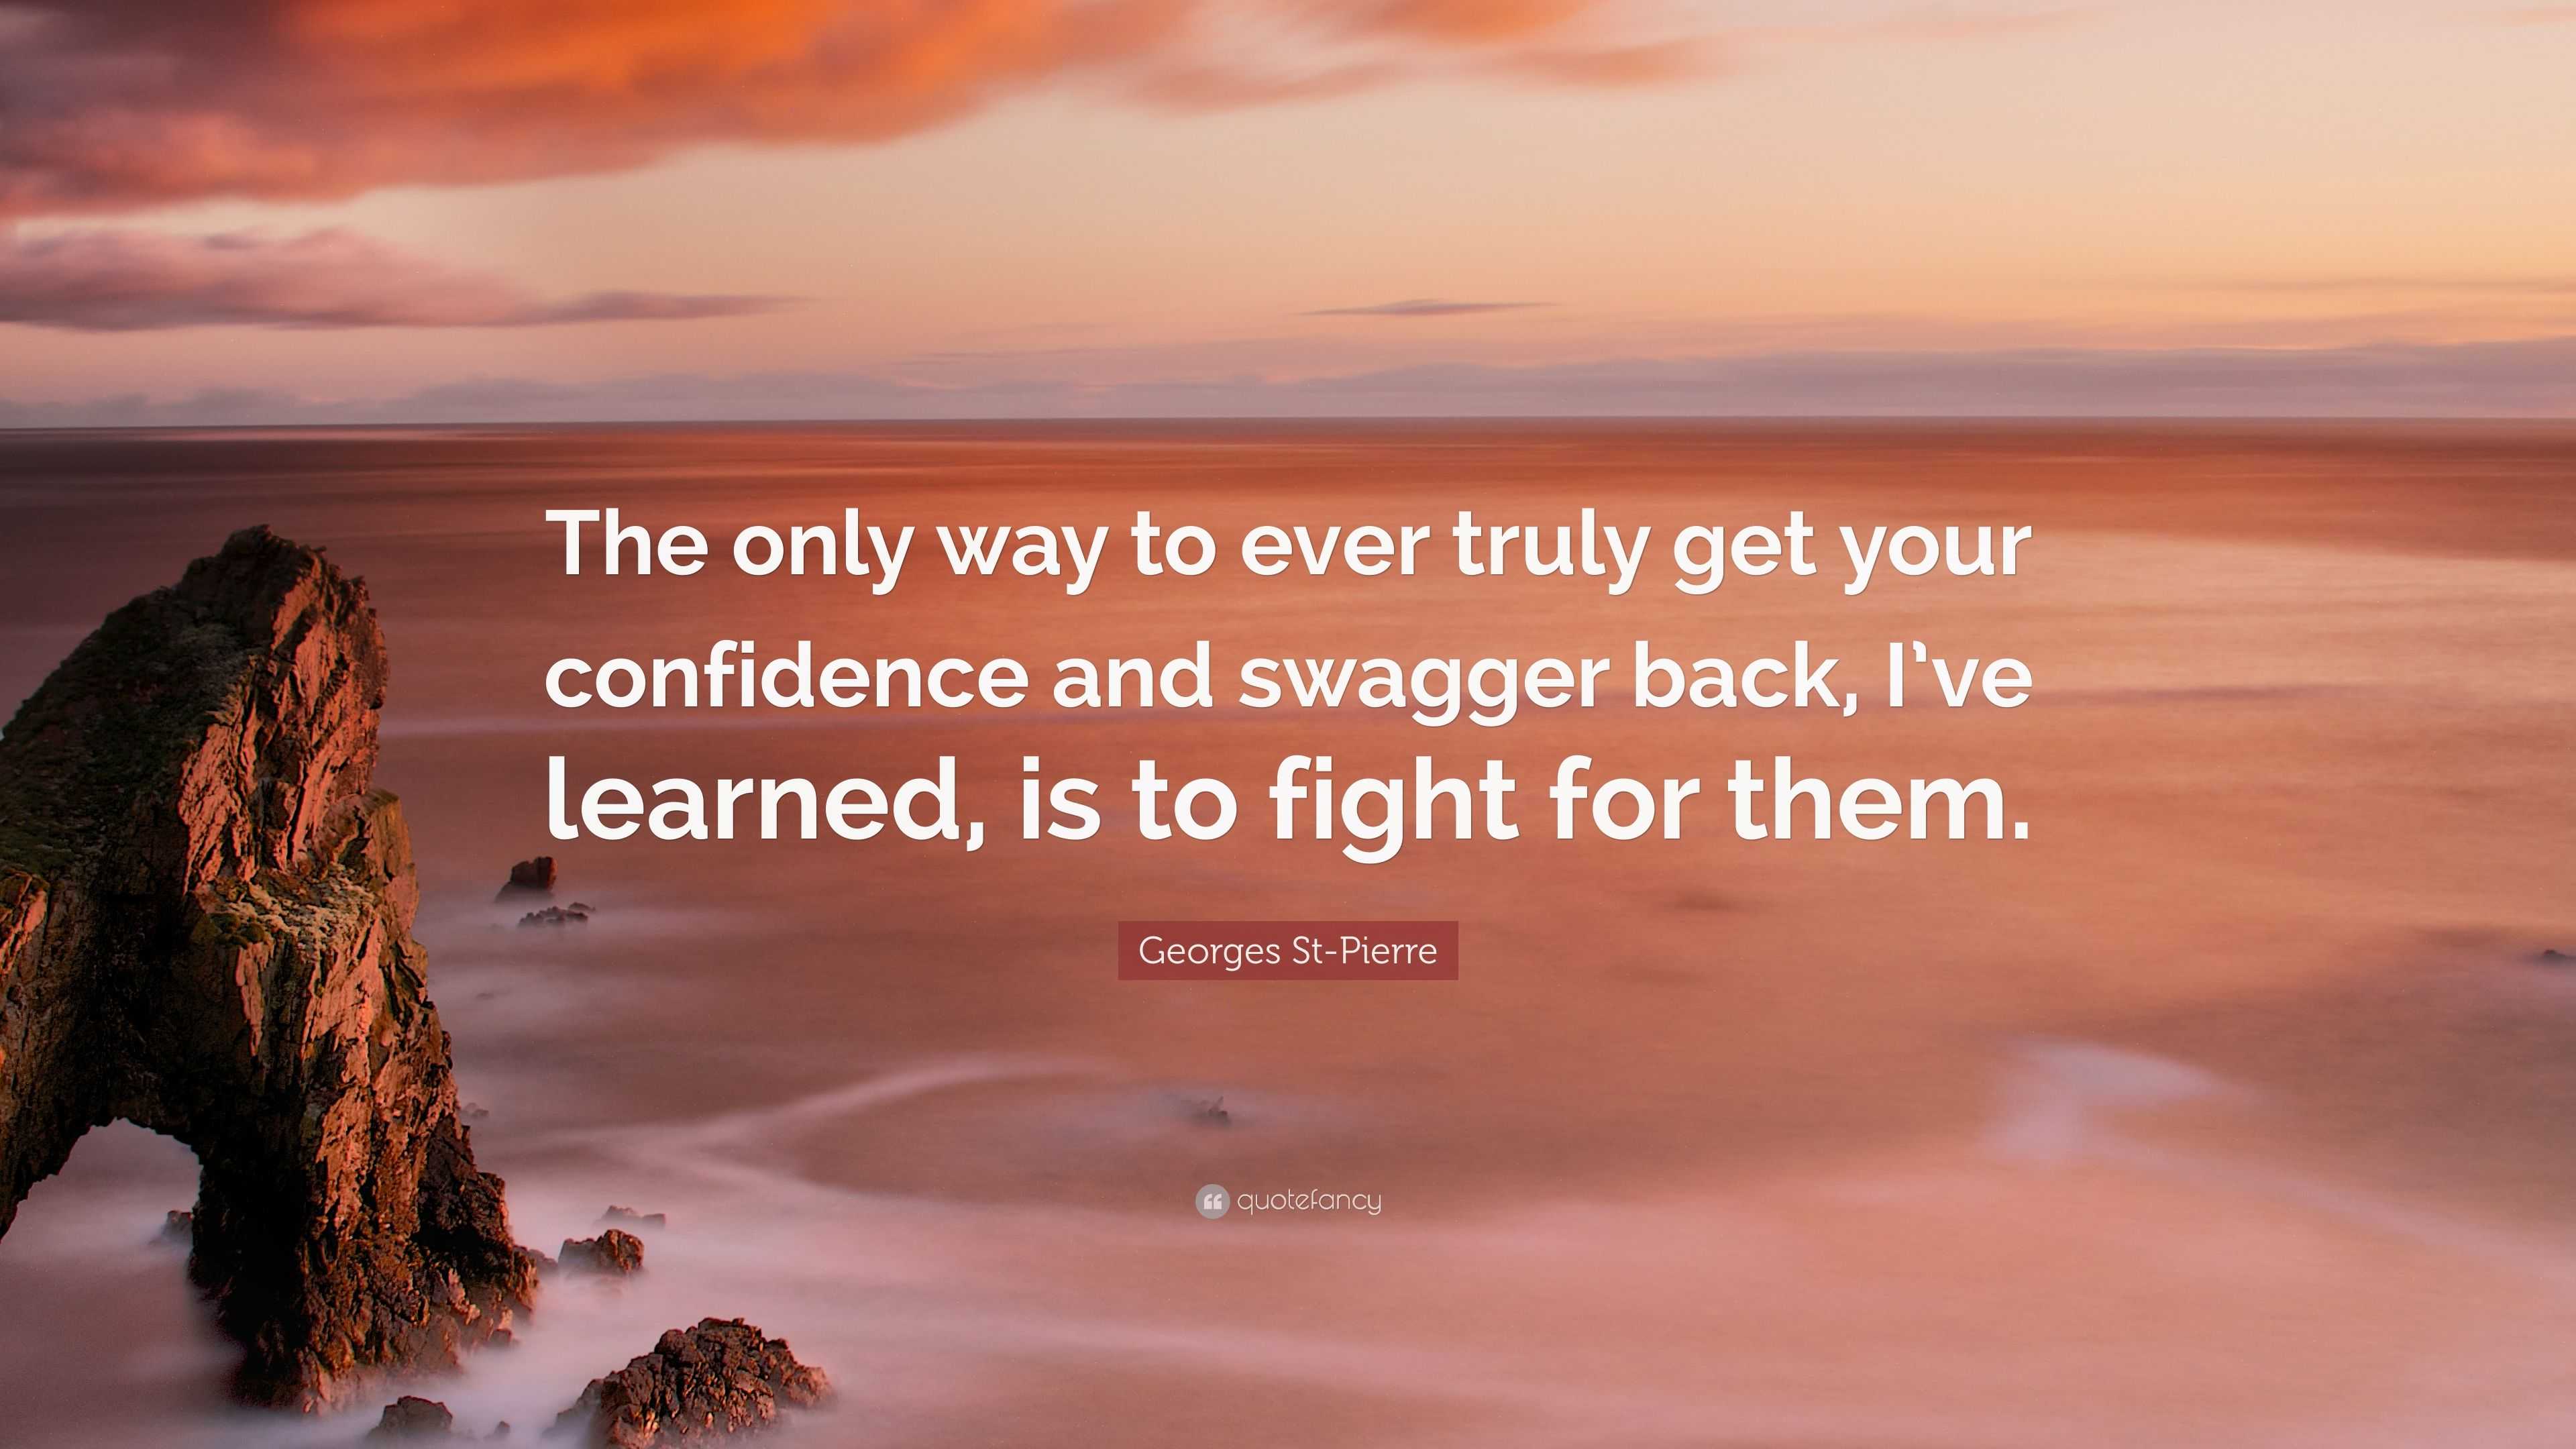 Georges St-Pierre Quote: "The only way to ever truly get your confidence and swagger back, I've ...